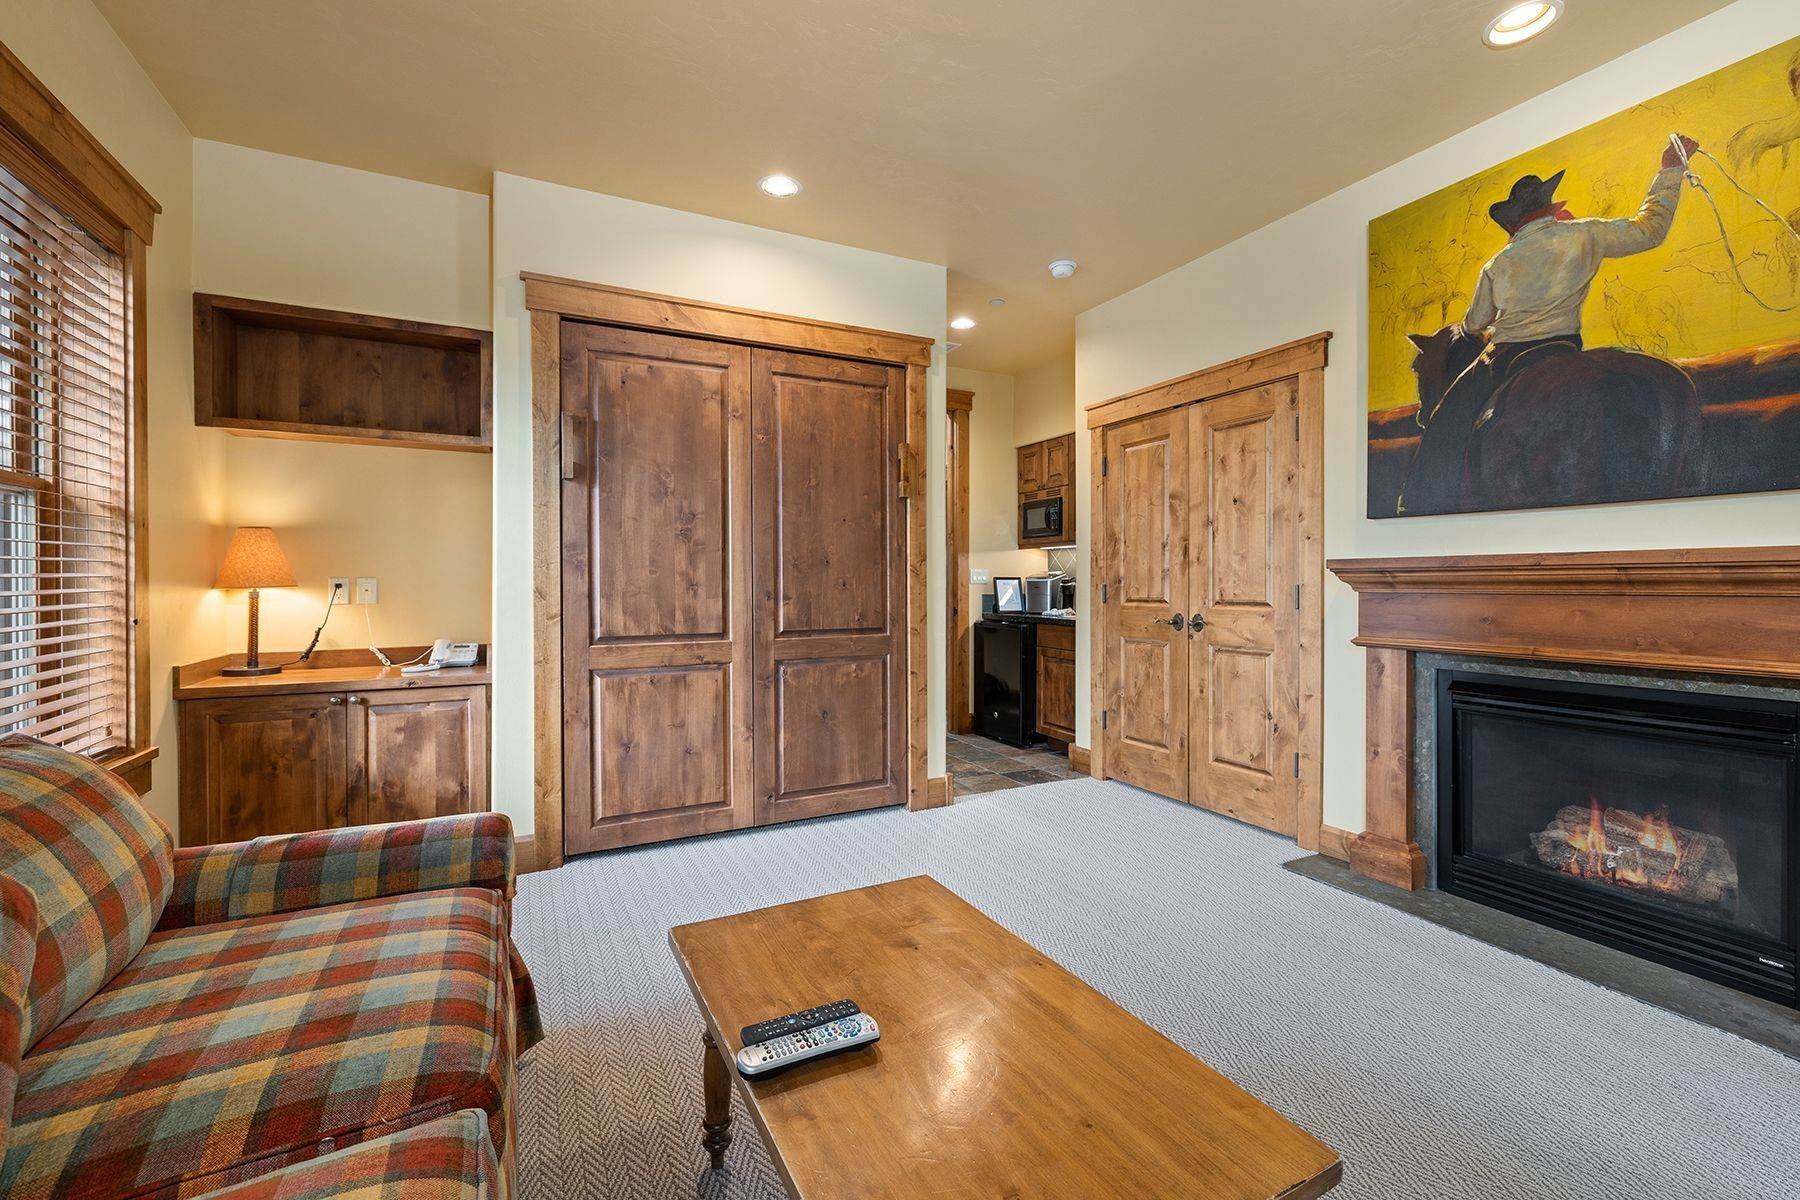 17. Condominiums for Sale at Premier Grand View Condo 548 Snow King Loop Road Jackson, Wyoming 83001 United States